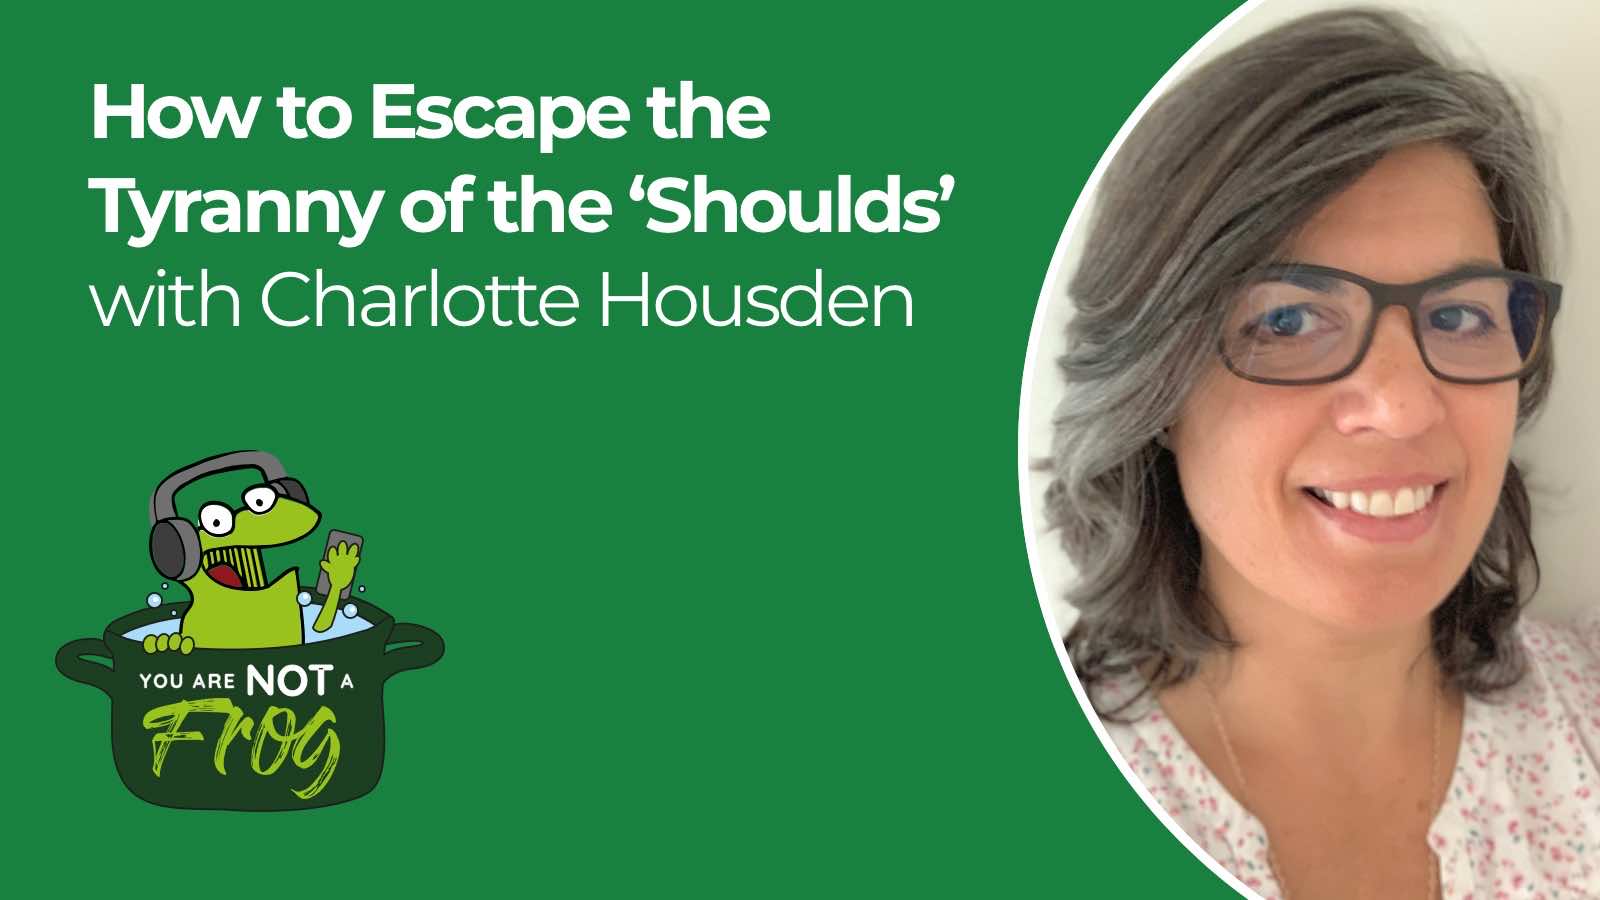 How to Escape the Tyranny of the ‘Shoulds’